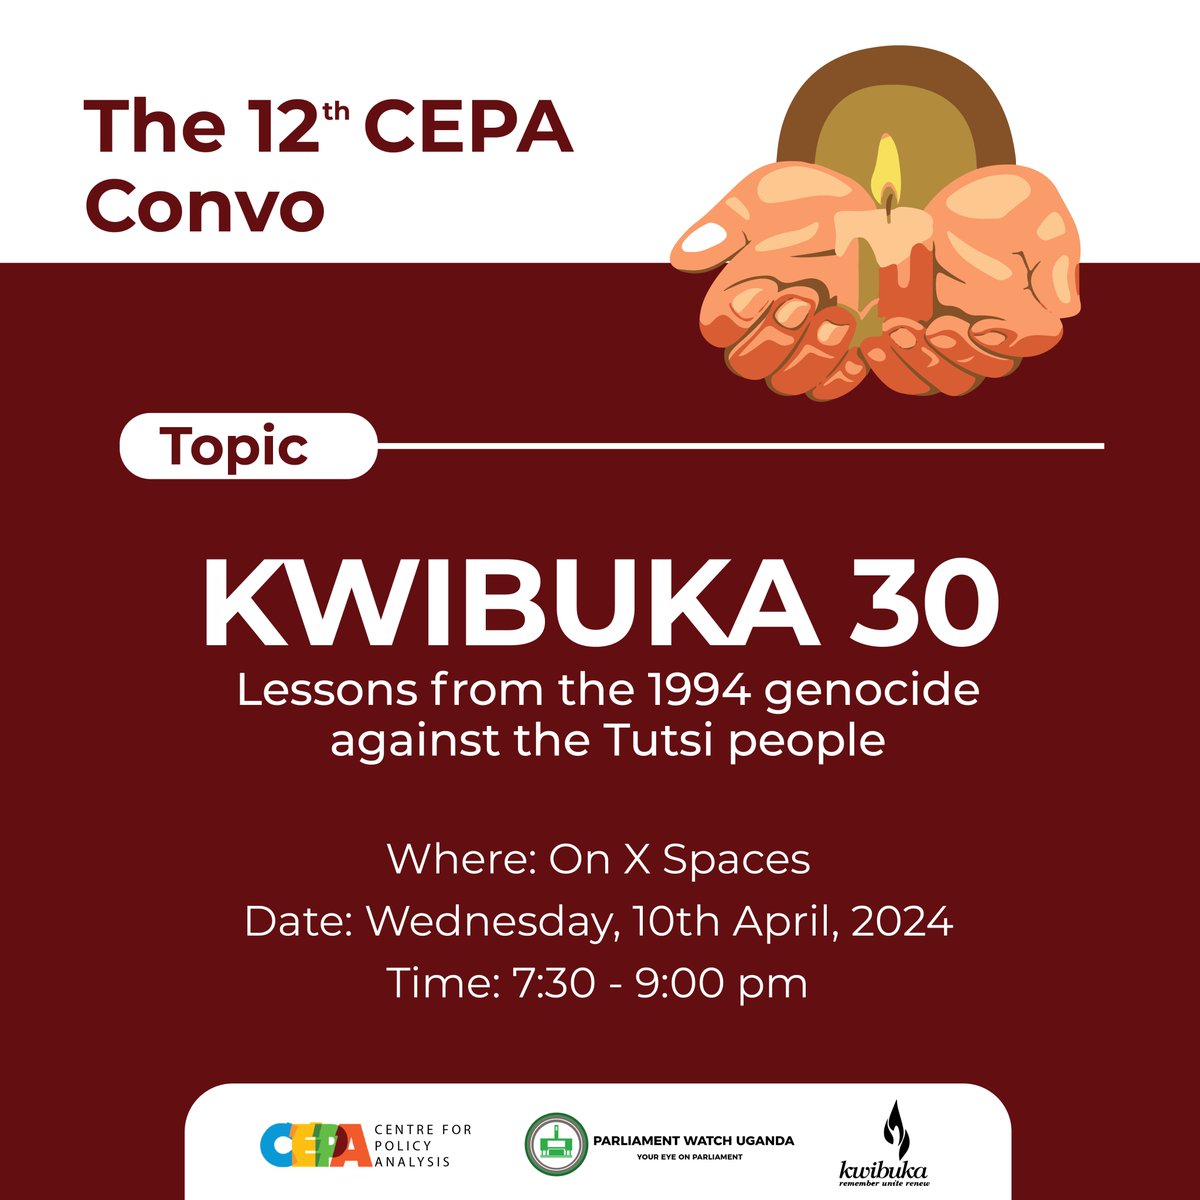 Join us today at 7:30 pm for #TheCEPAconvo on Kwibuka 30: Lessons from the 1994 genocide against the Tutsi people. #Xspaces Set a reminder - x.com/i/spaces/1odkr…